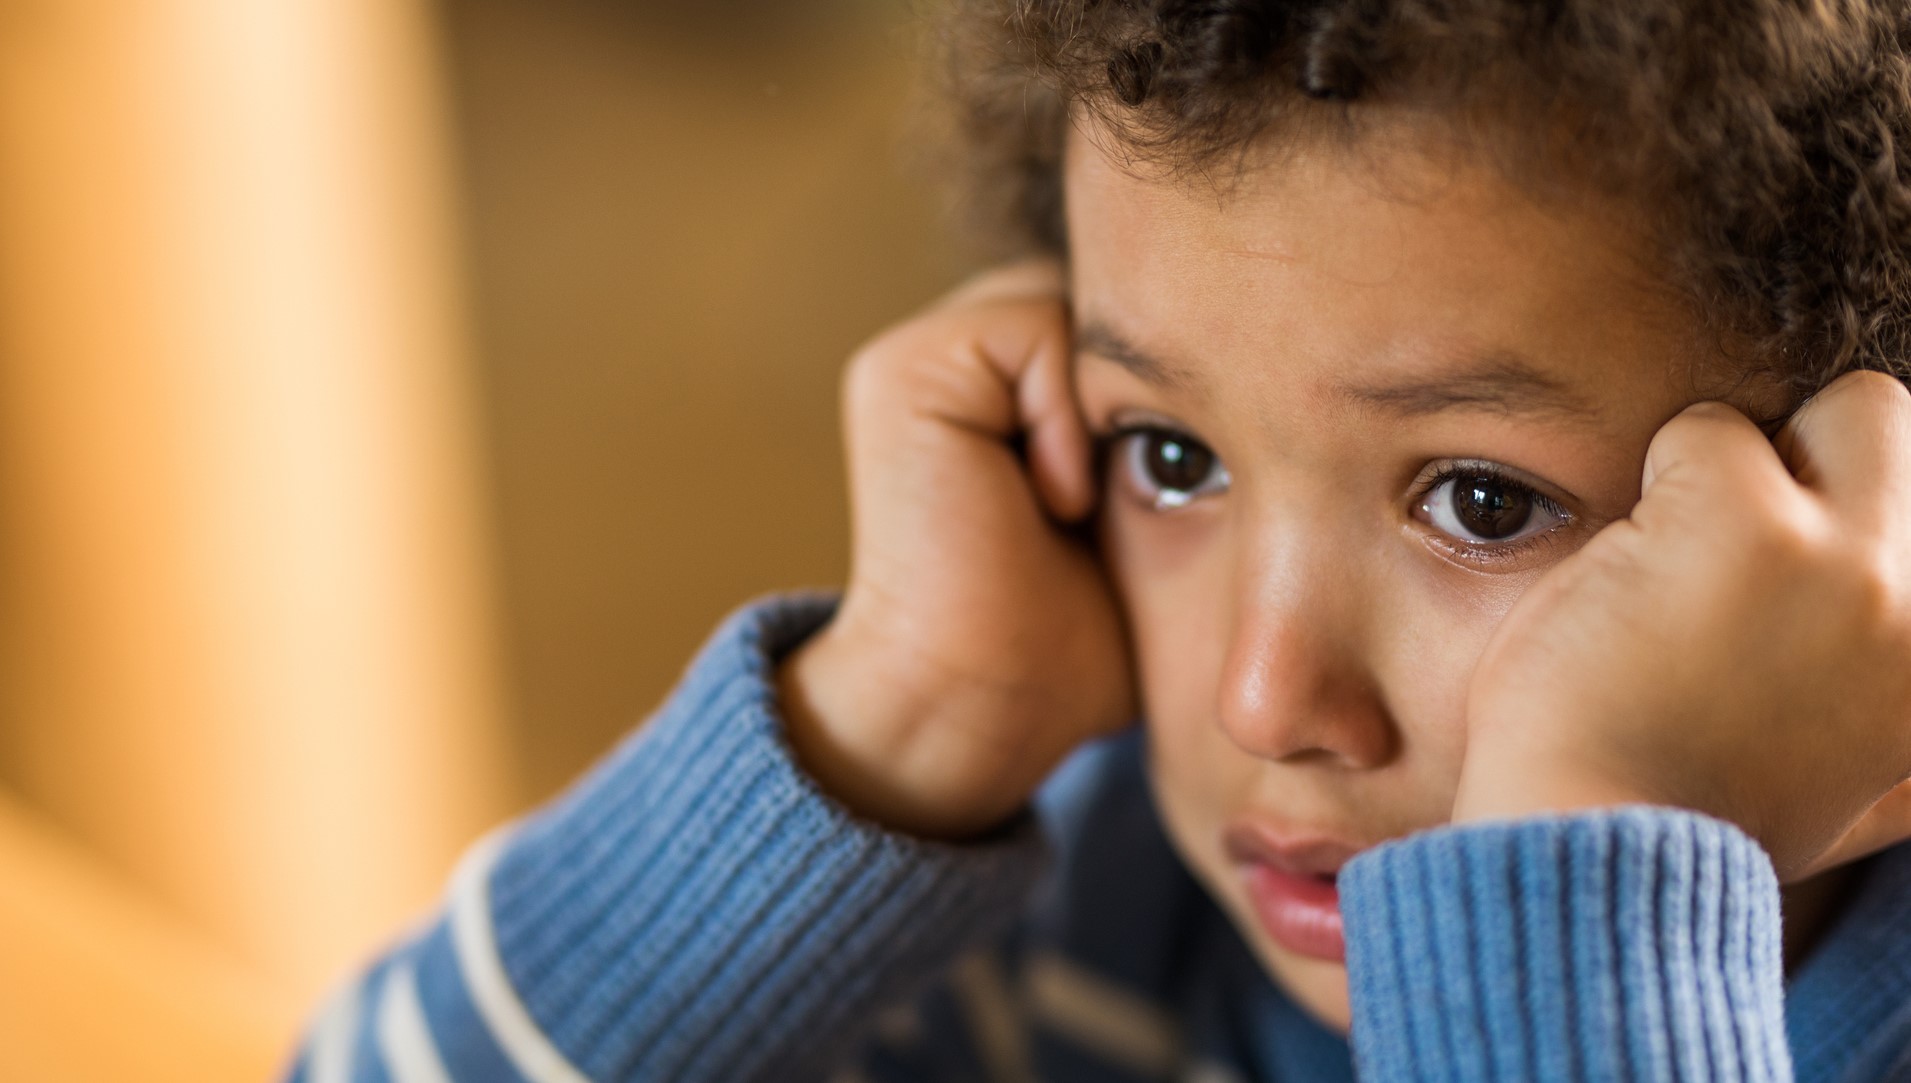 Emotional Anxiety: Seeing Through The Eyes of a Child